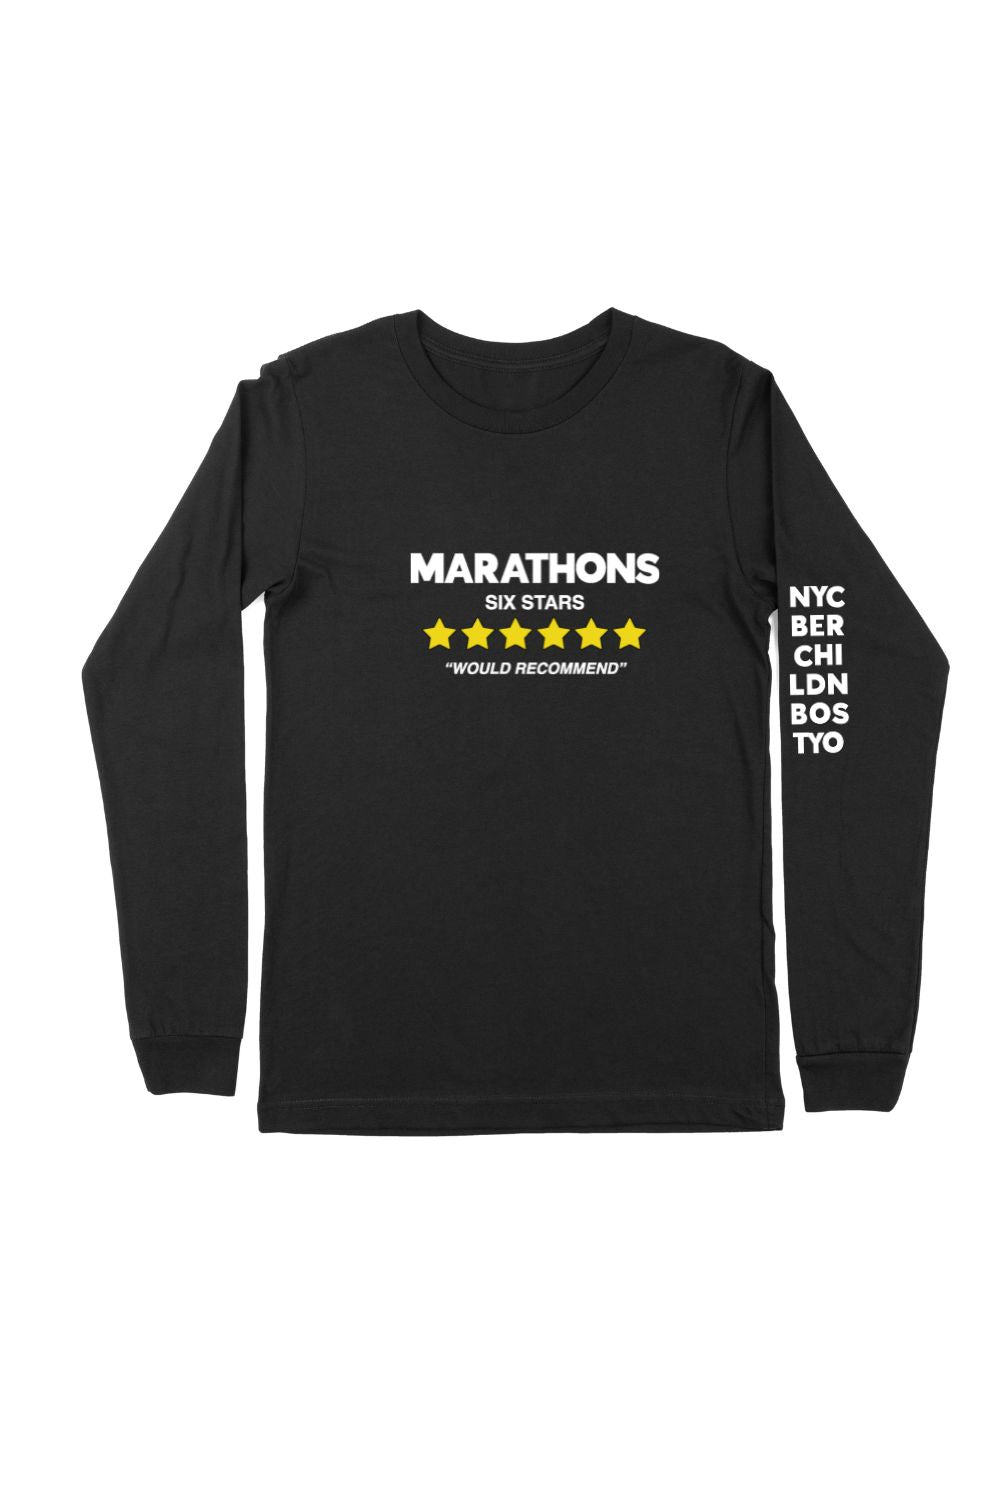 Marathons, Would Recommend Long Sleeve